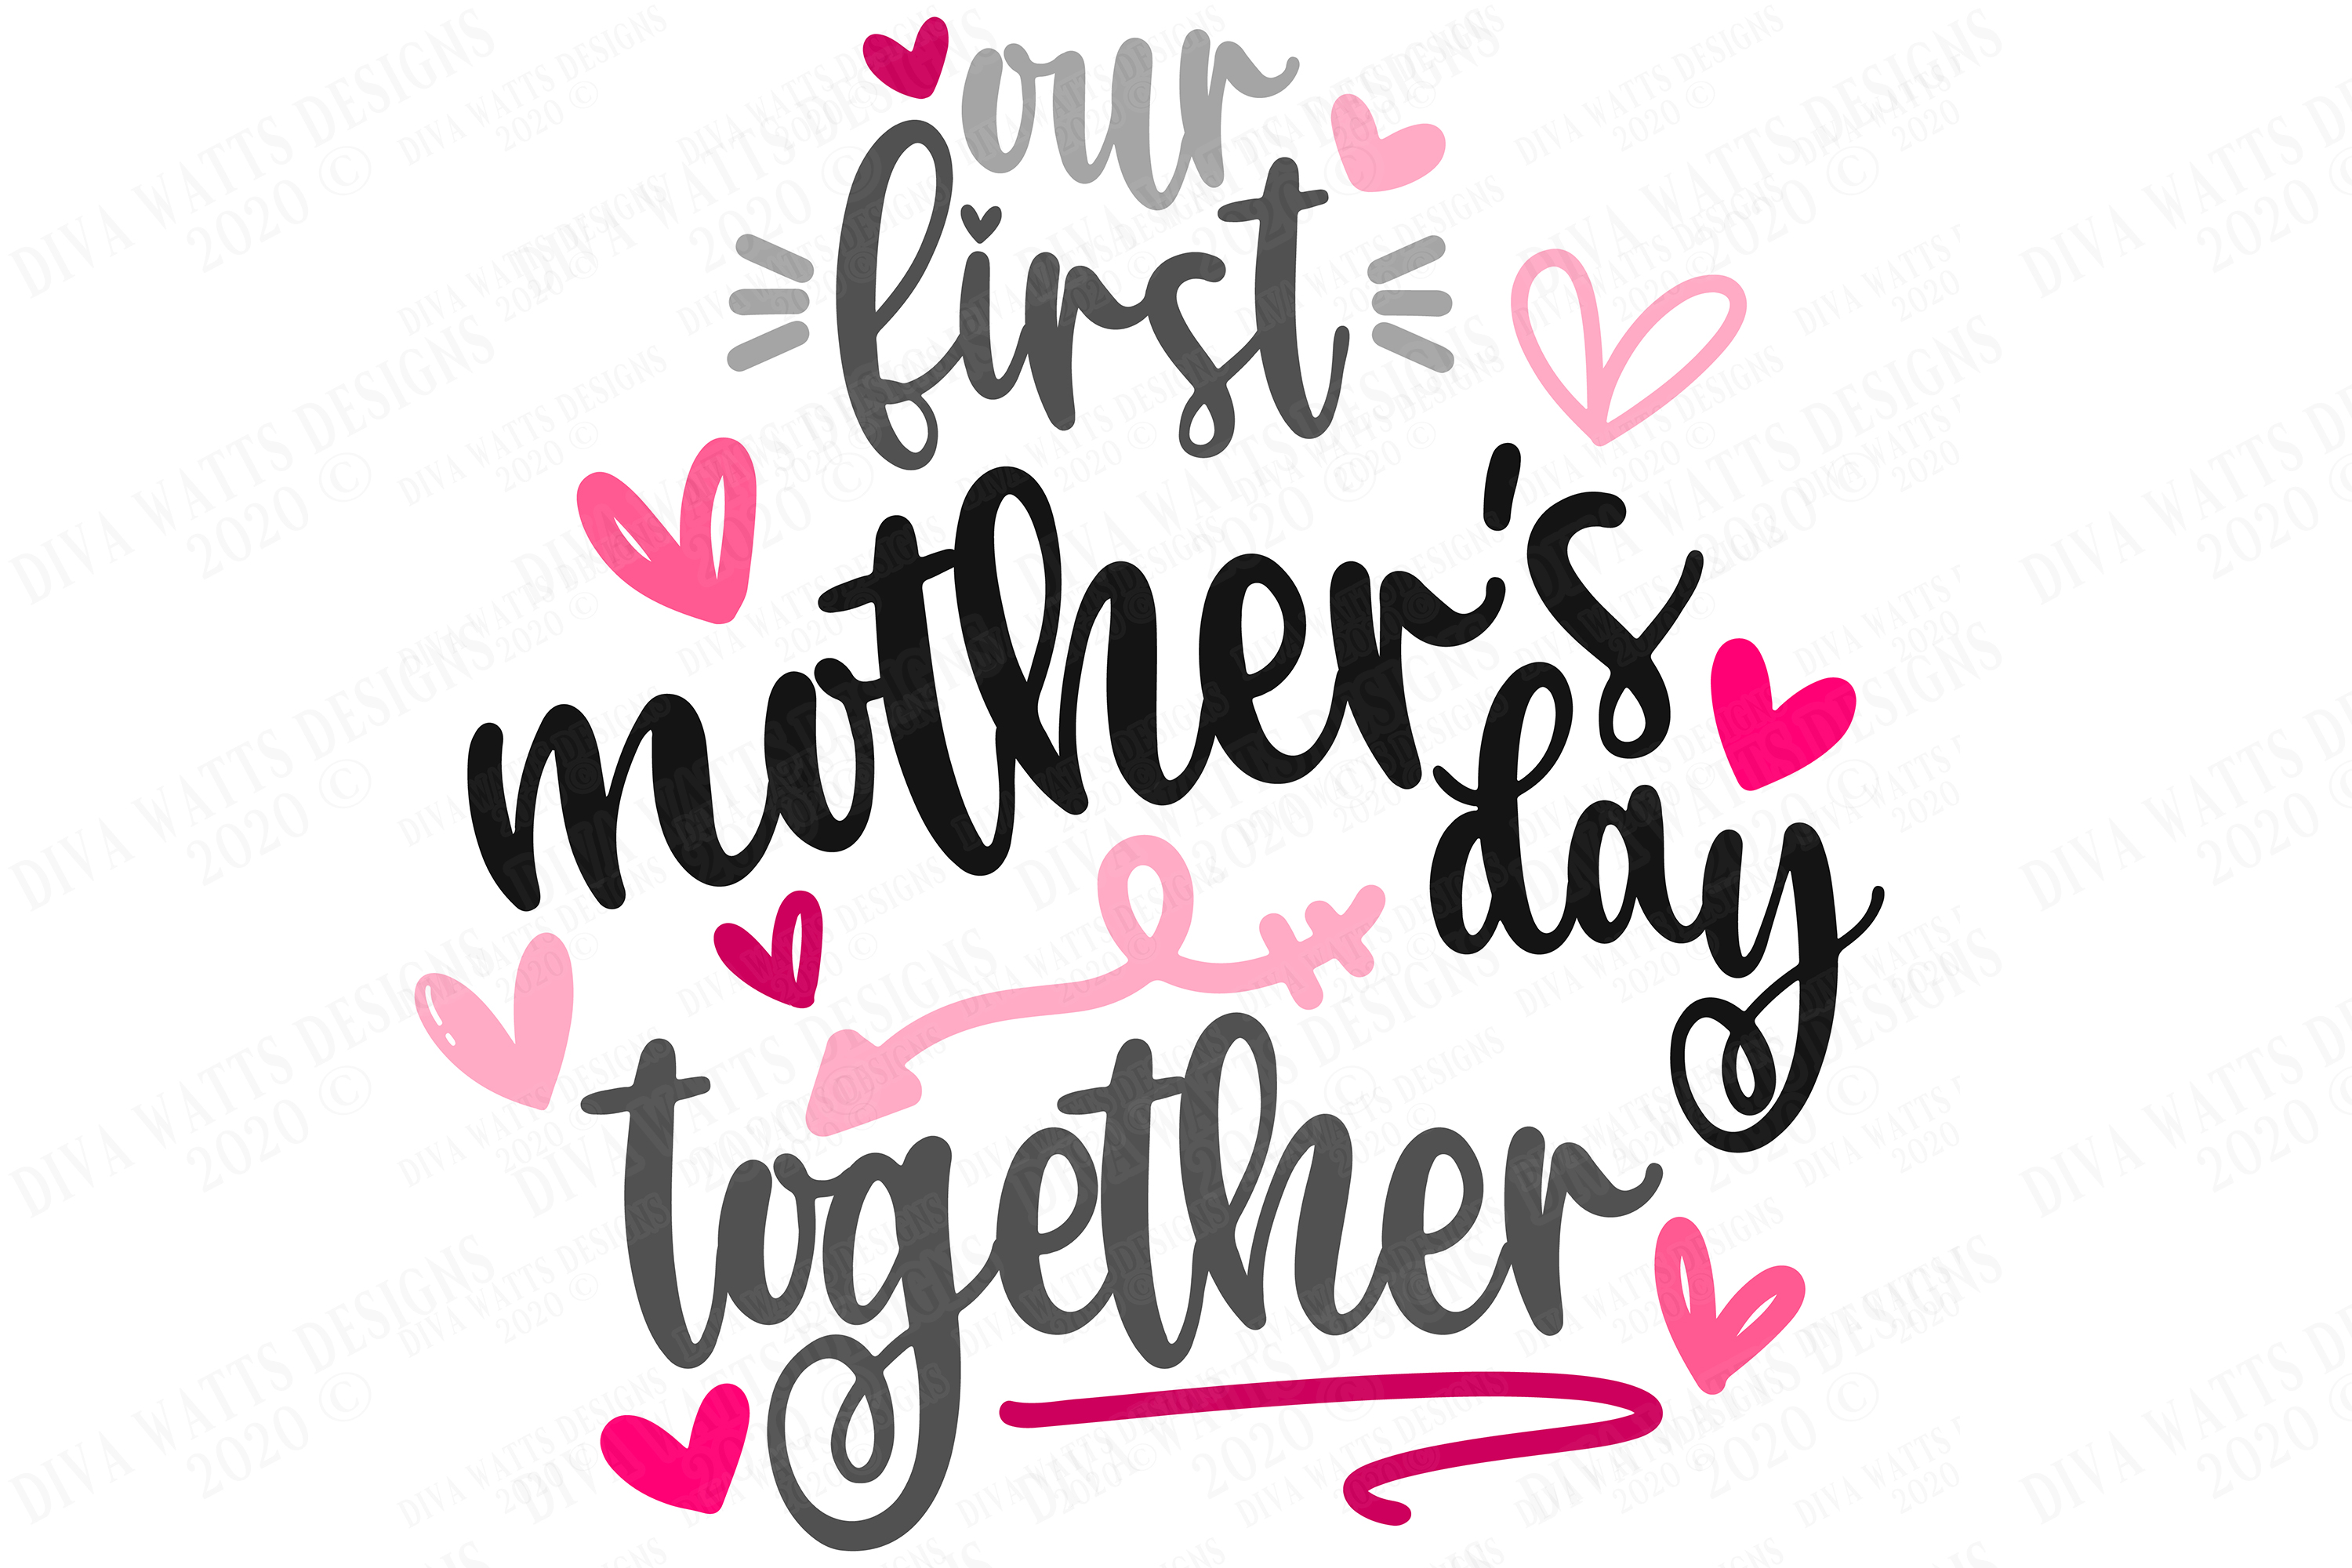 Download Our First Mother's Day Together - Matching Shirts SVG DXF AI